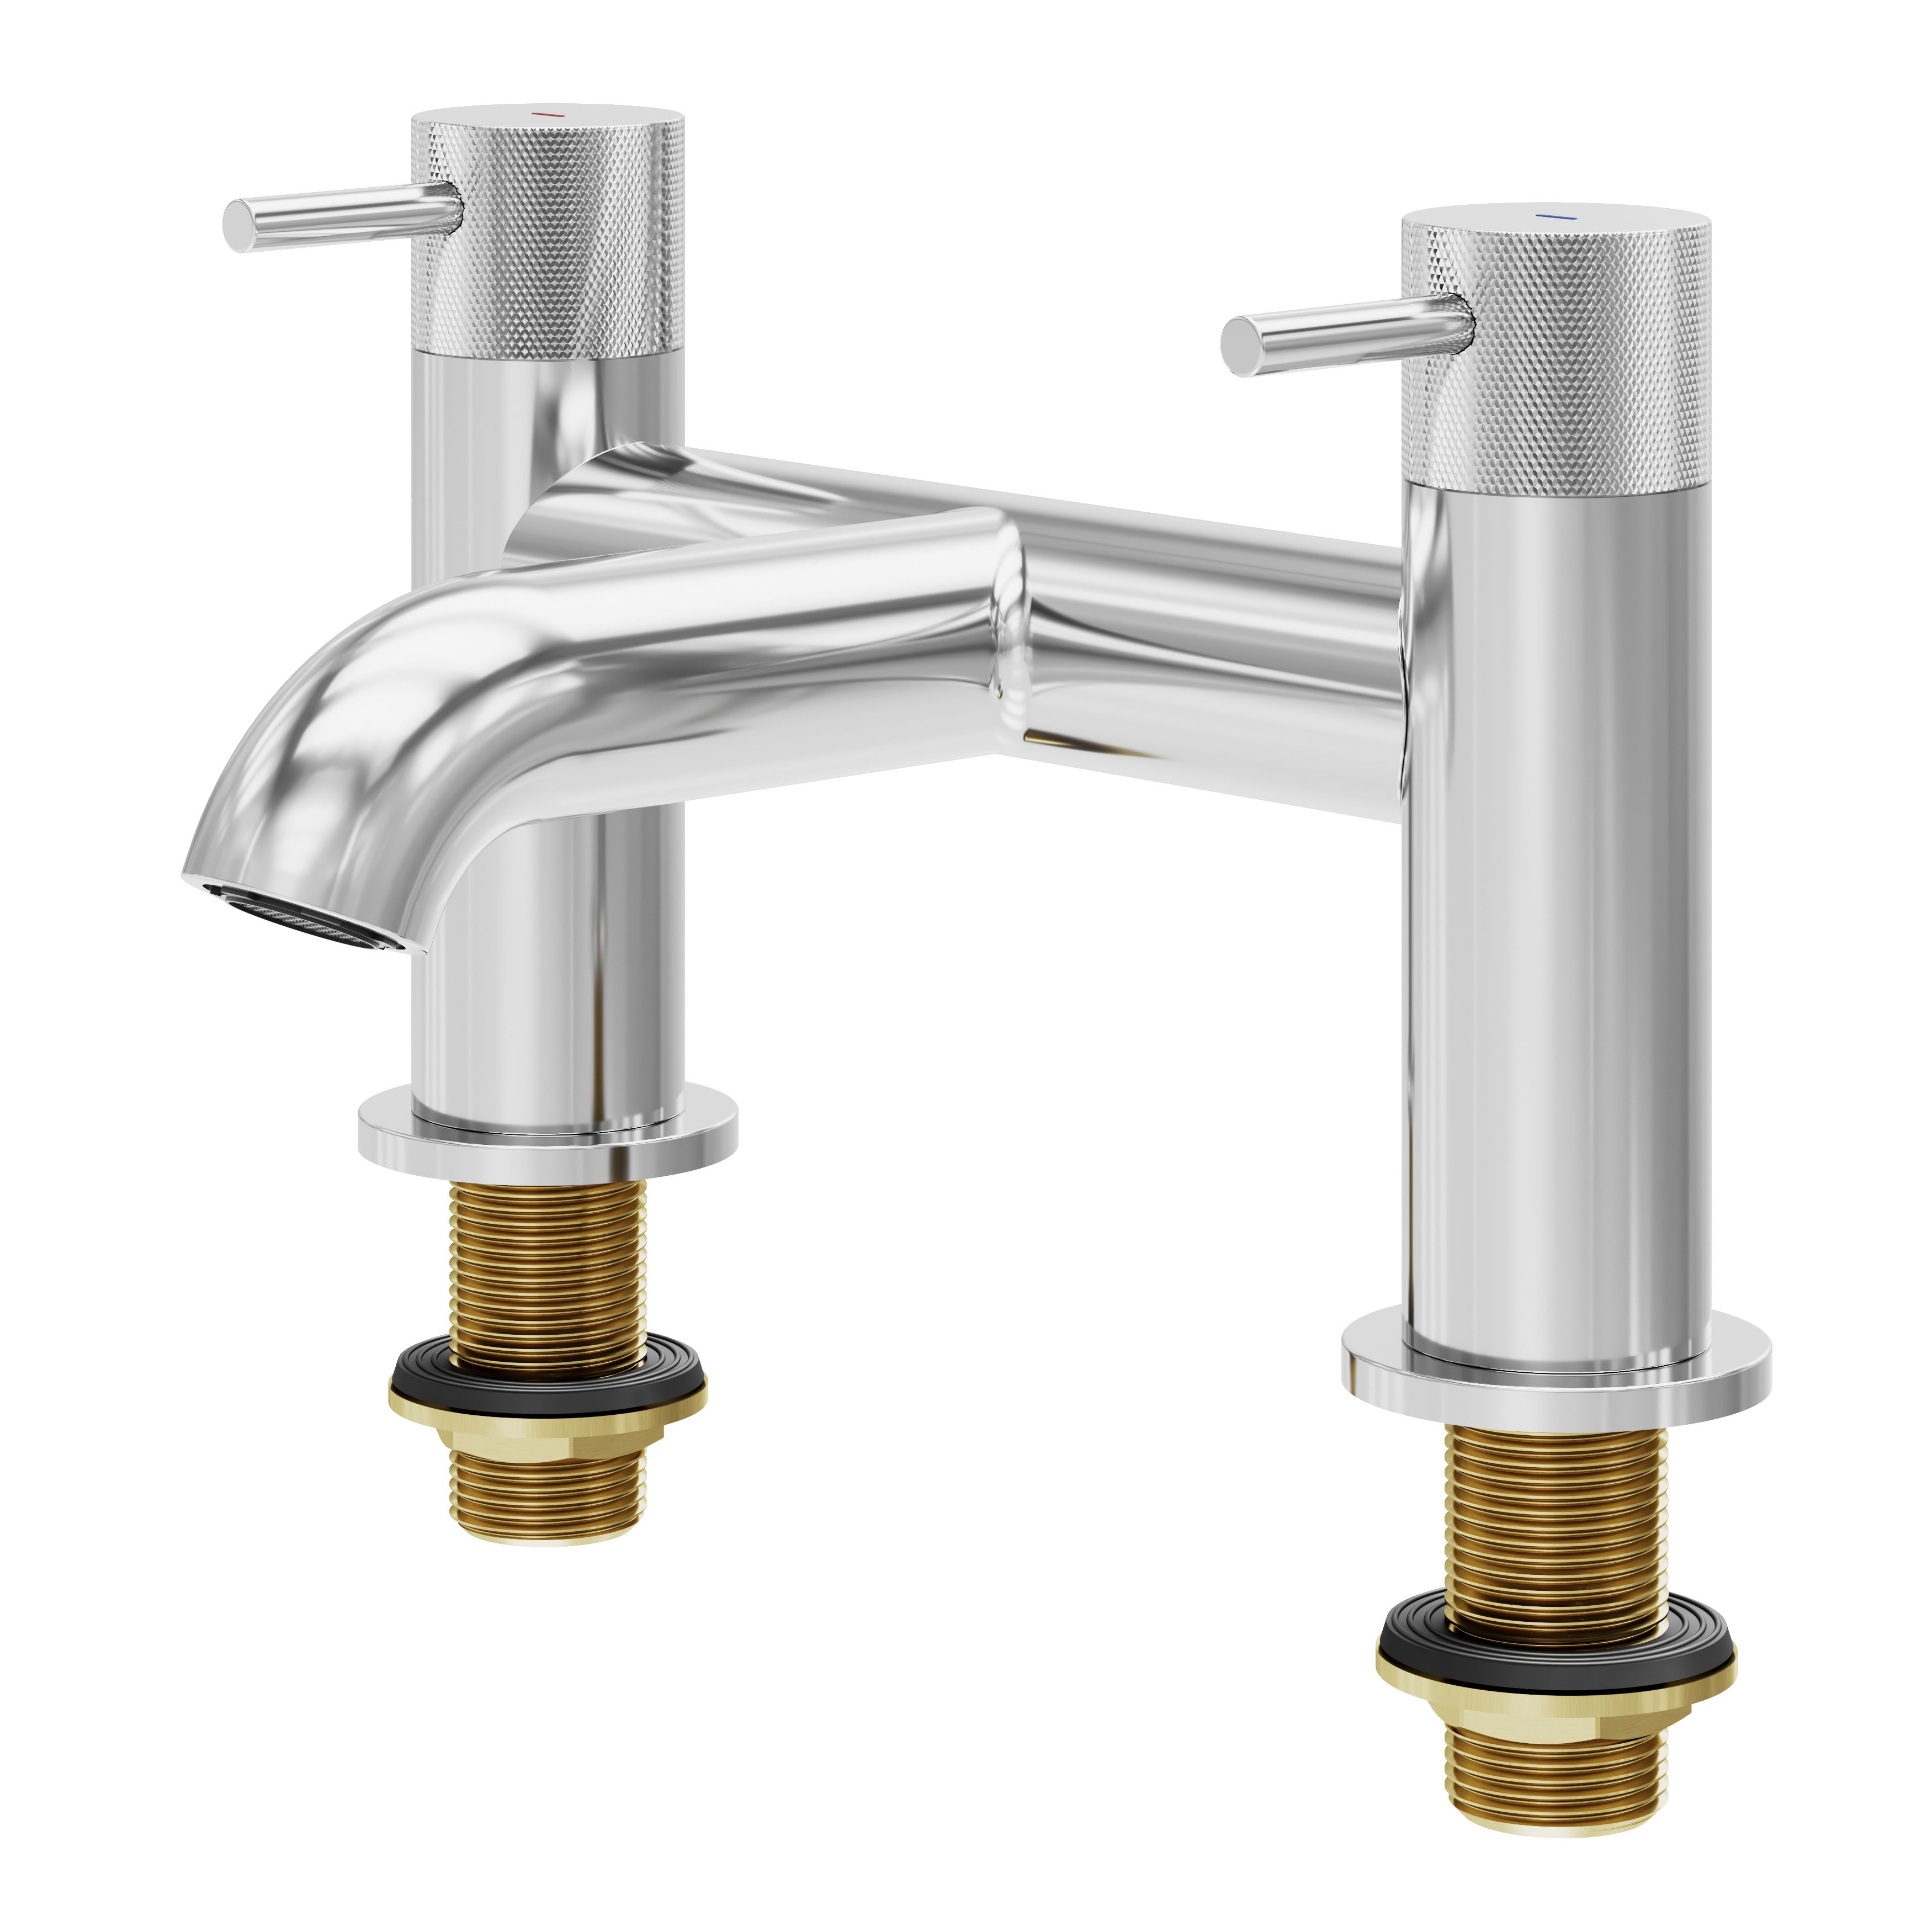 GoodHome Owens Gloss Chrome effect Deck-mounted Manual Double Bath Filler Tap